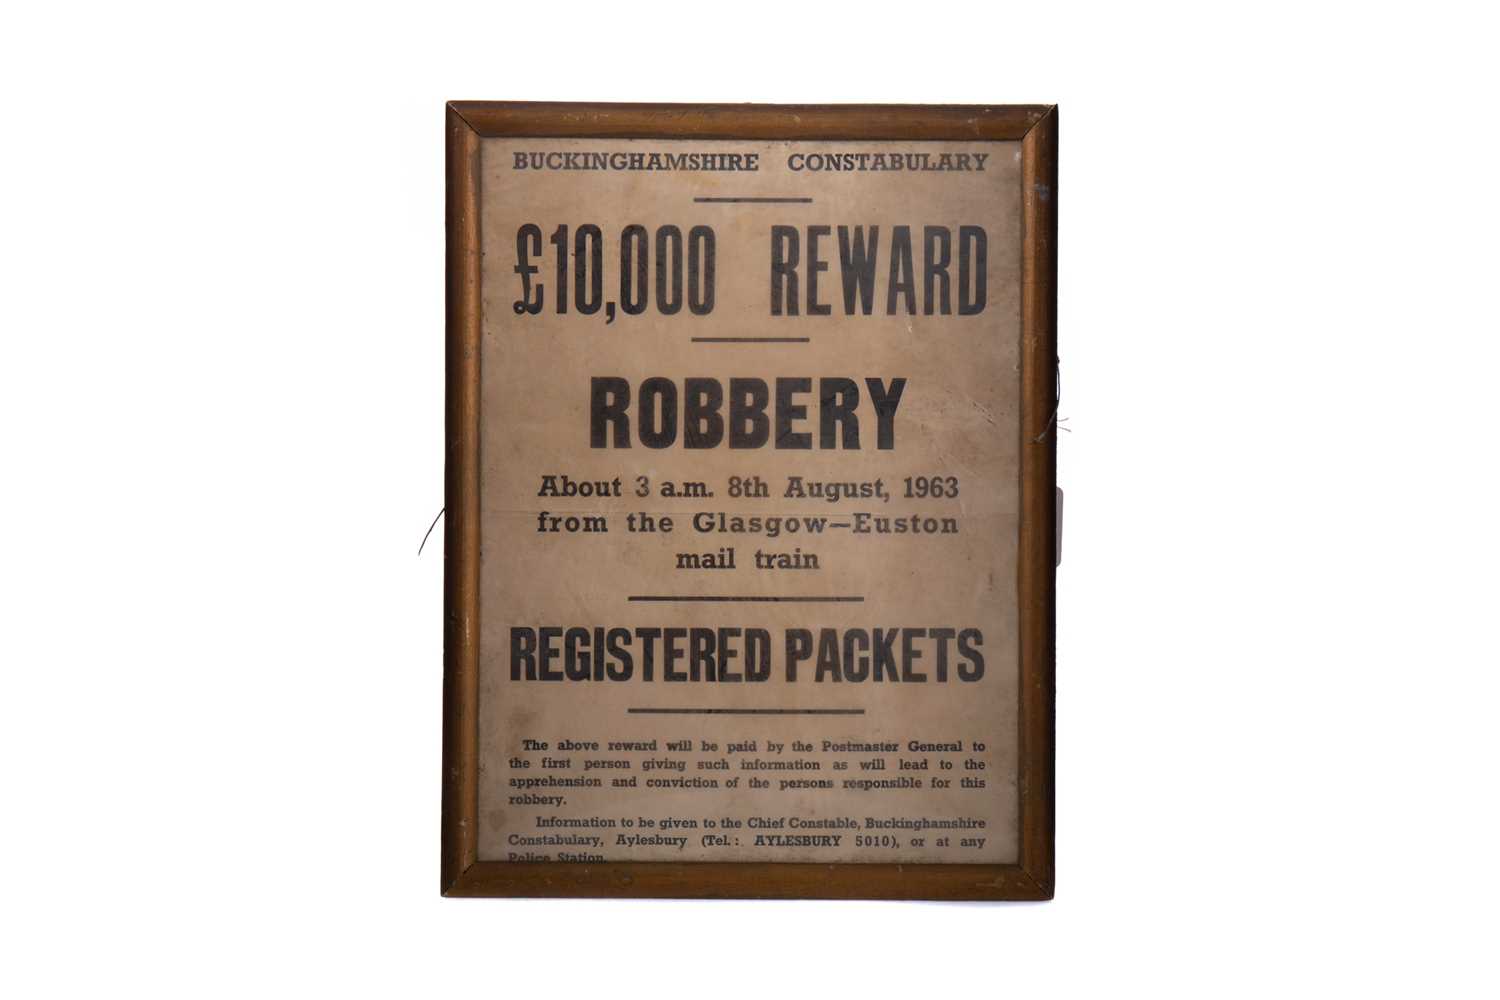 Lot 1002 - 'THE GREAT TRAIN ROBBERY' ORIGINAL POSTER FROM BUCKINGHAMSHIRE CONSTABULARY